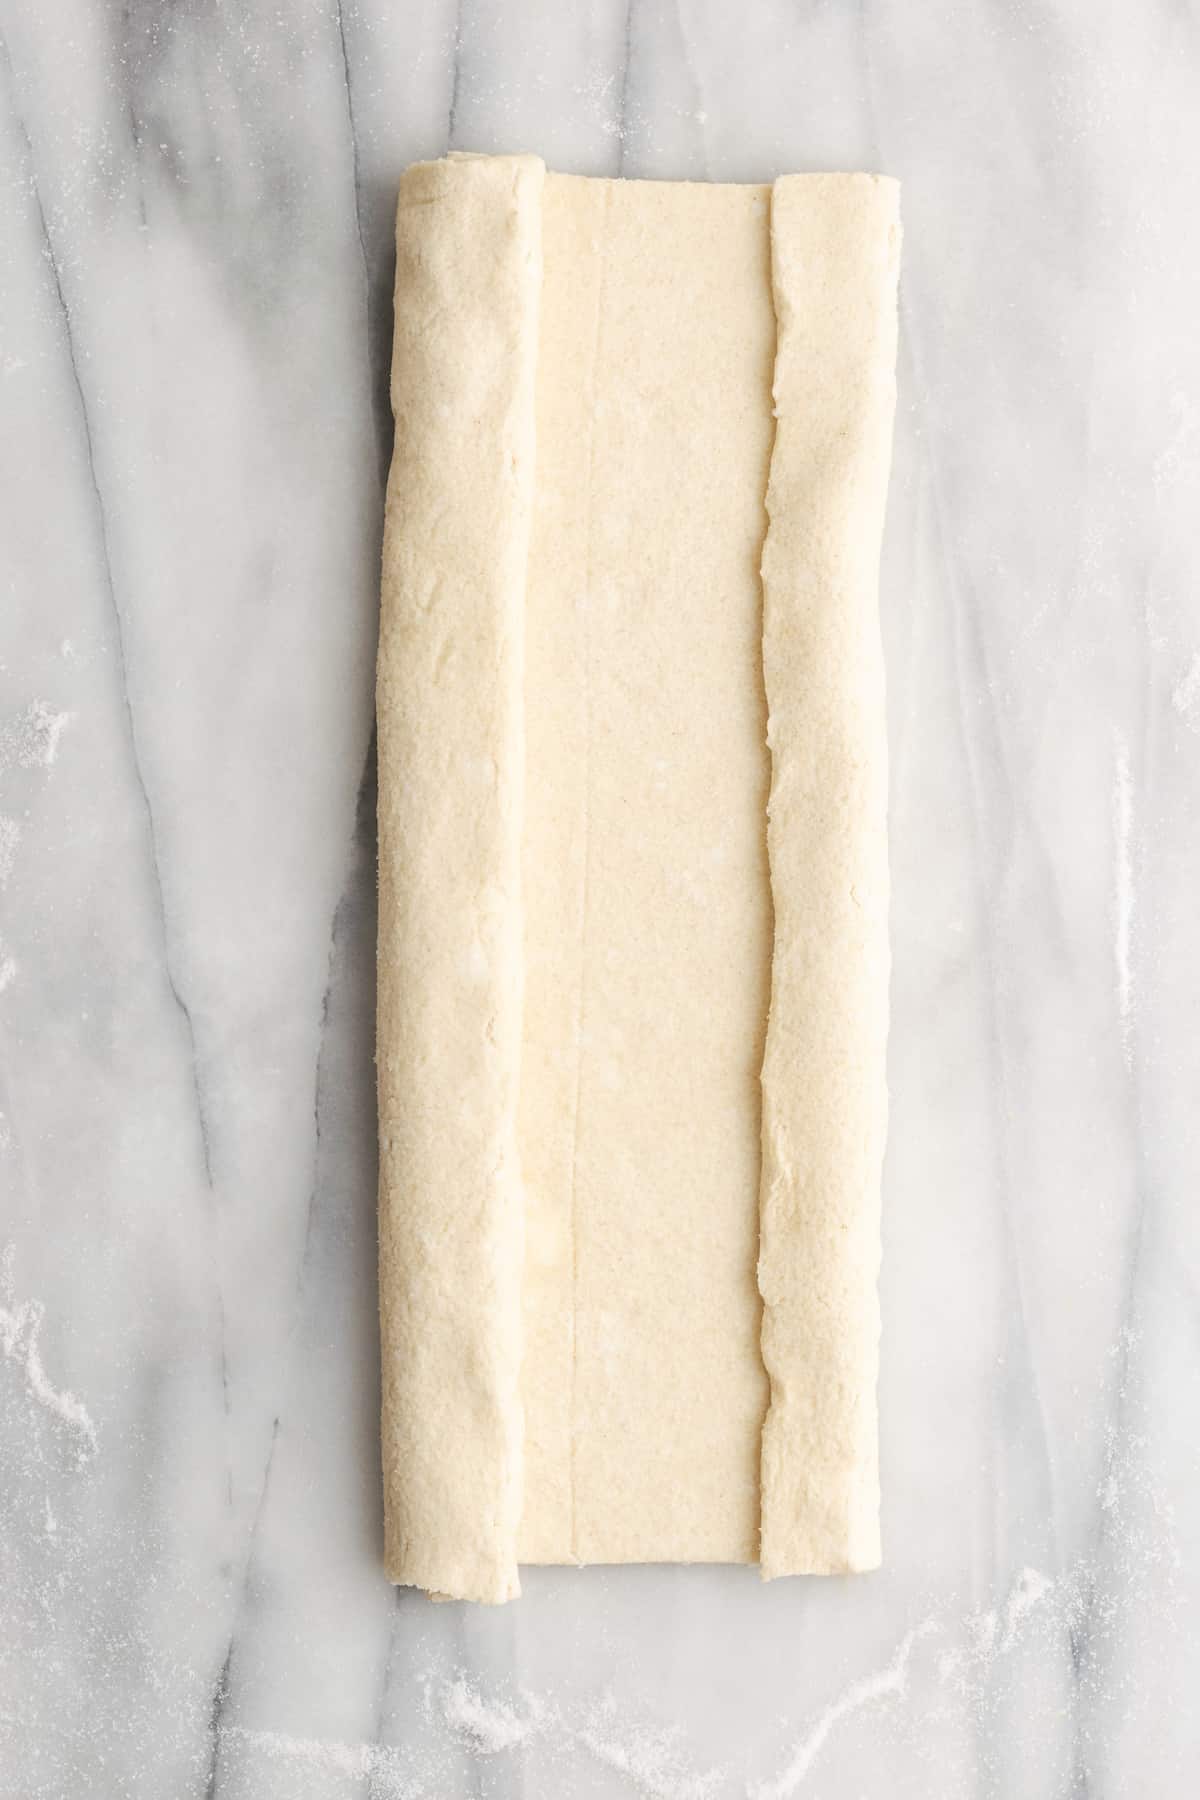 A rectangle of puff pastry dough with one side folded in about halfway, and the other about a quarter